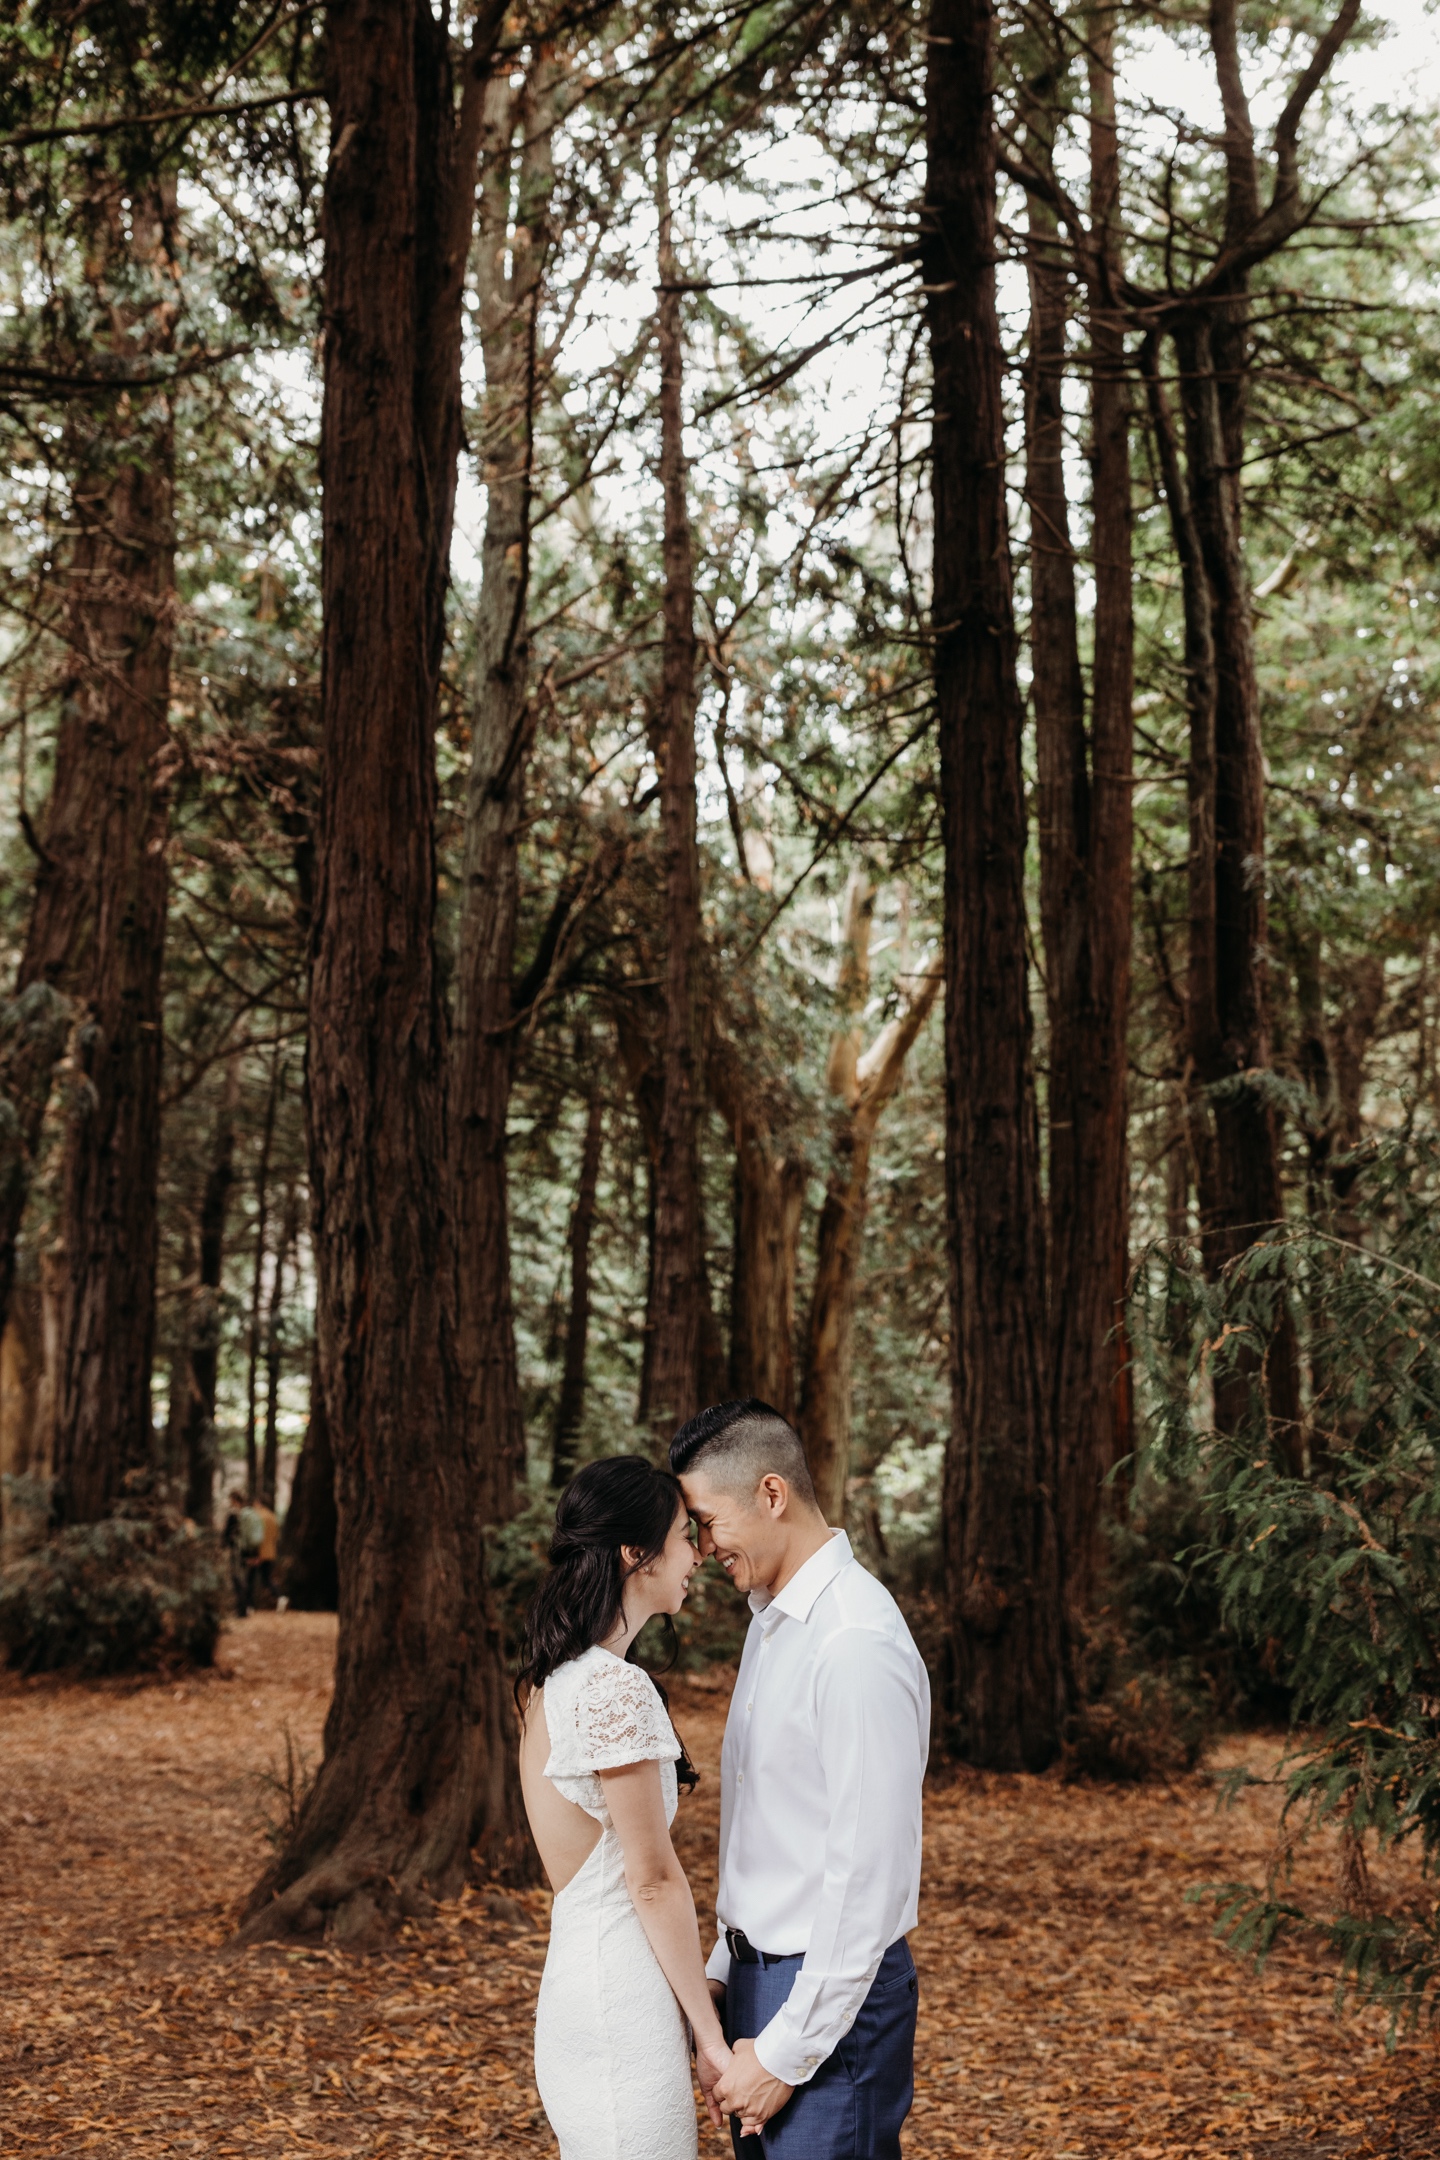 Bride and groom smile at each other while touching foreheads beneath the Redwoods in San Francisco's Golden Gate Park after their elopement.